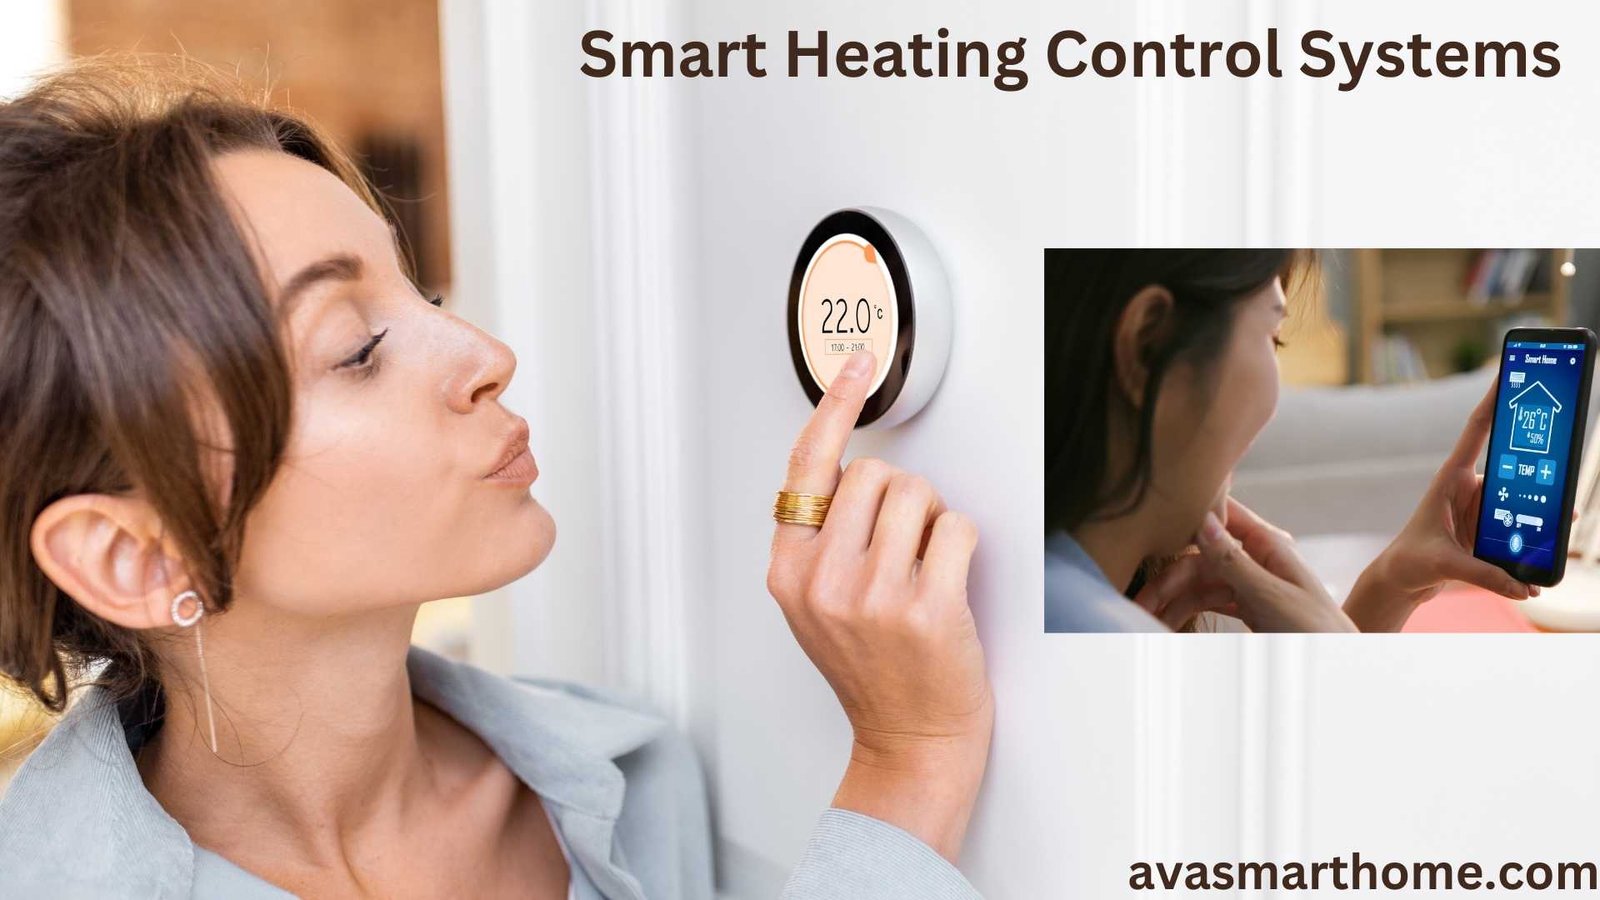 Smart Heating Control Systems